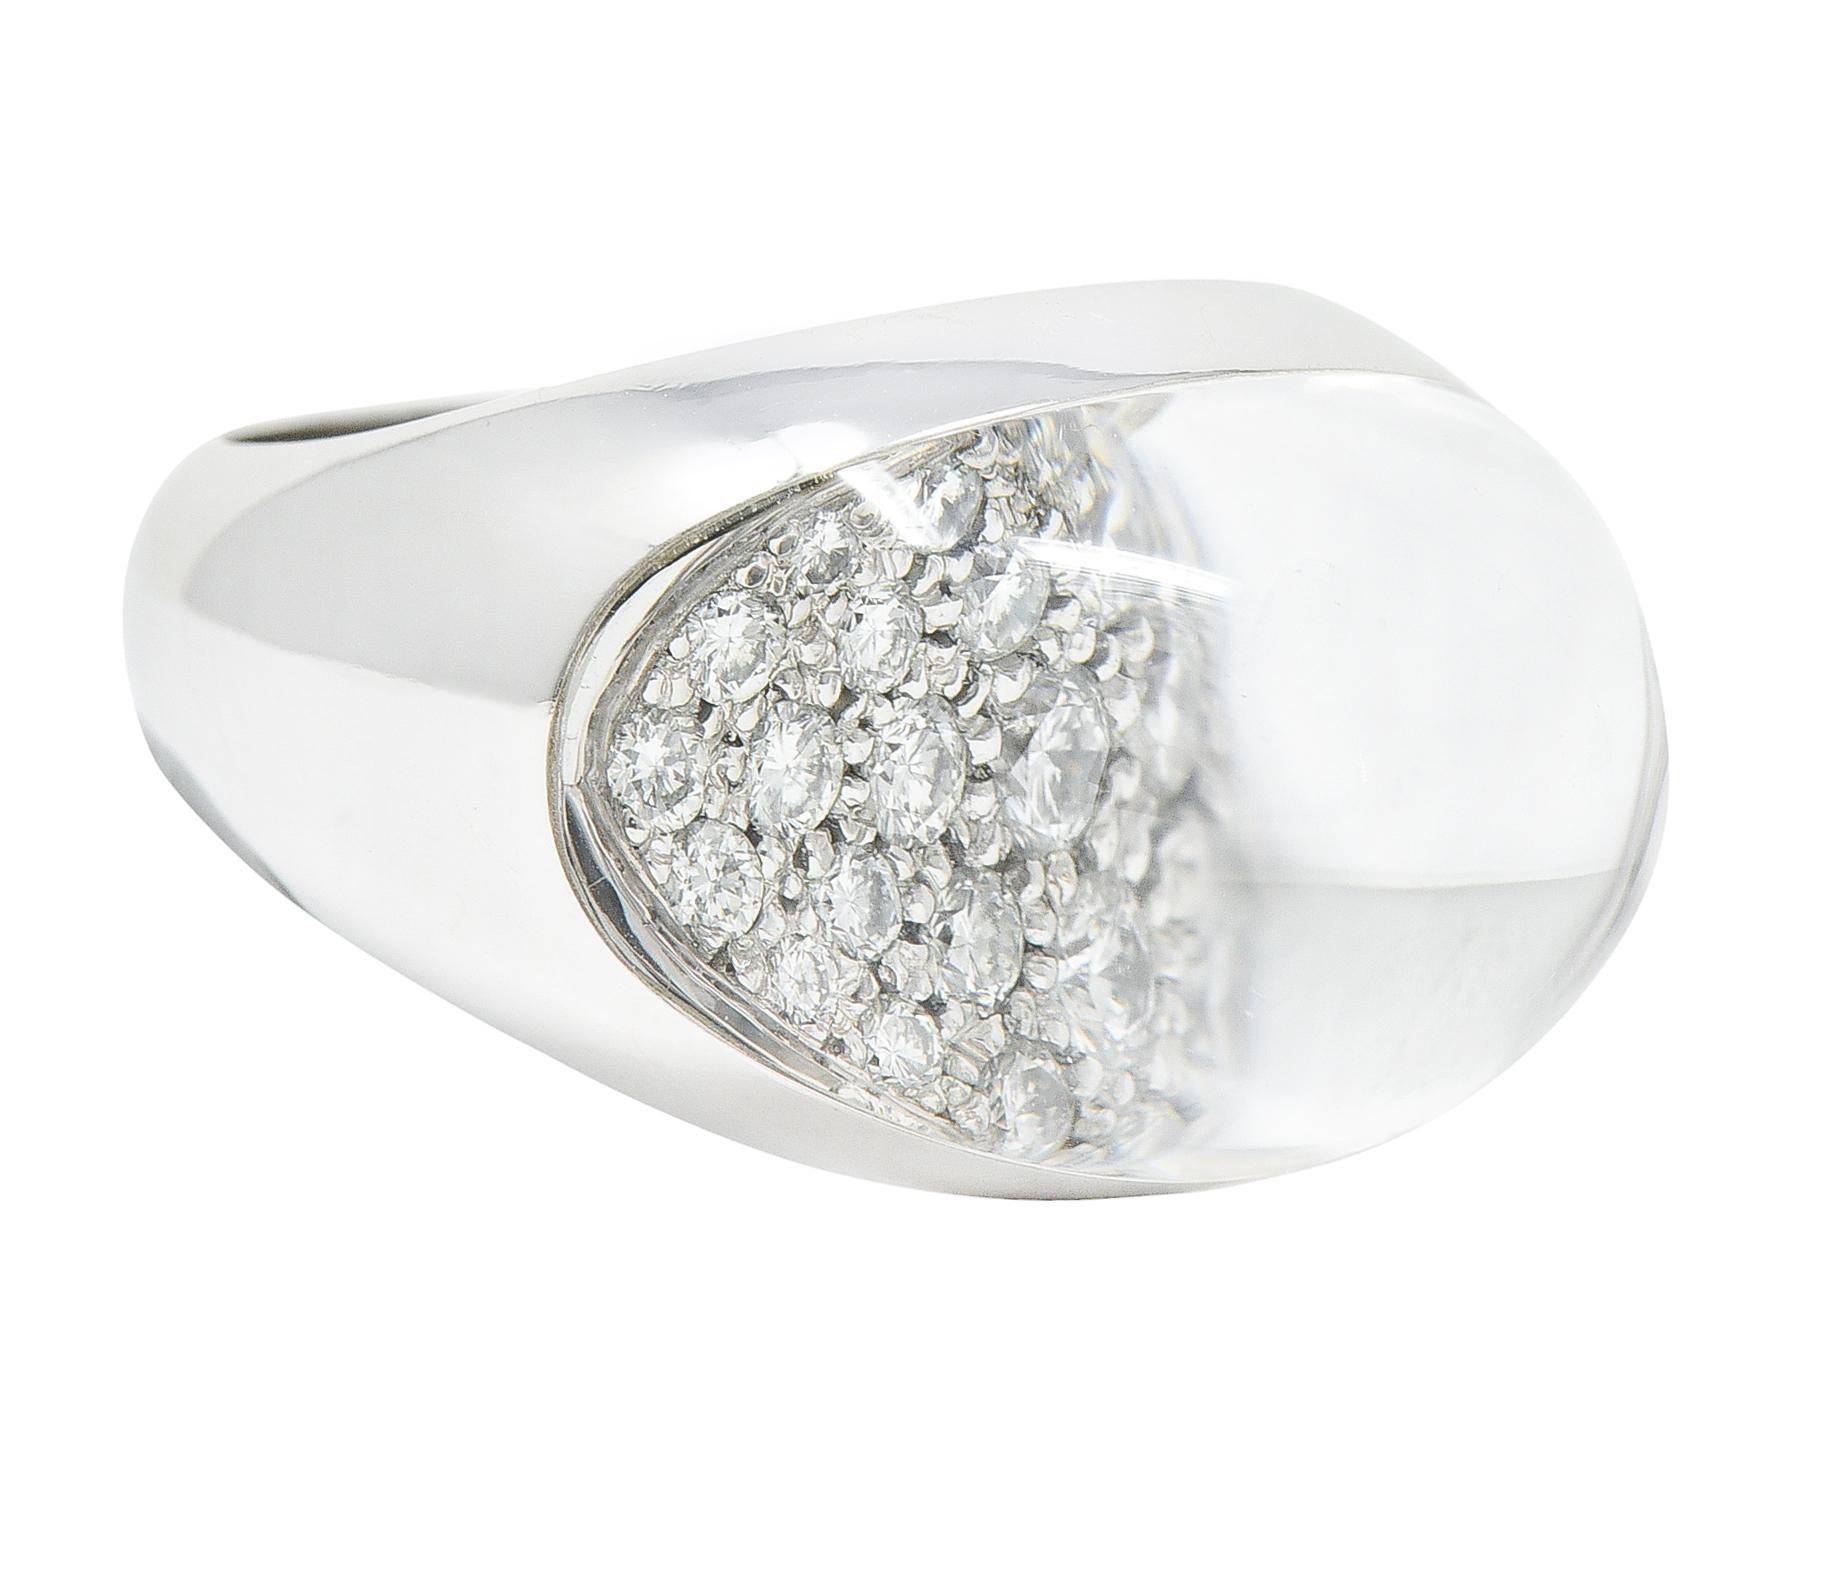 Bombè ring designed as domed rock crystal quartz atop pavè set round brilliant cut diamonds

Quartz dome is transparent, colorless, and magnifies diamonds

With high polished finish

Stamped 750 for 18 karat white gold

Numbered and signed for